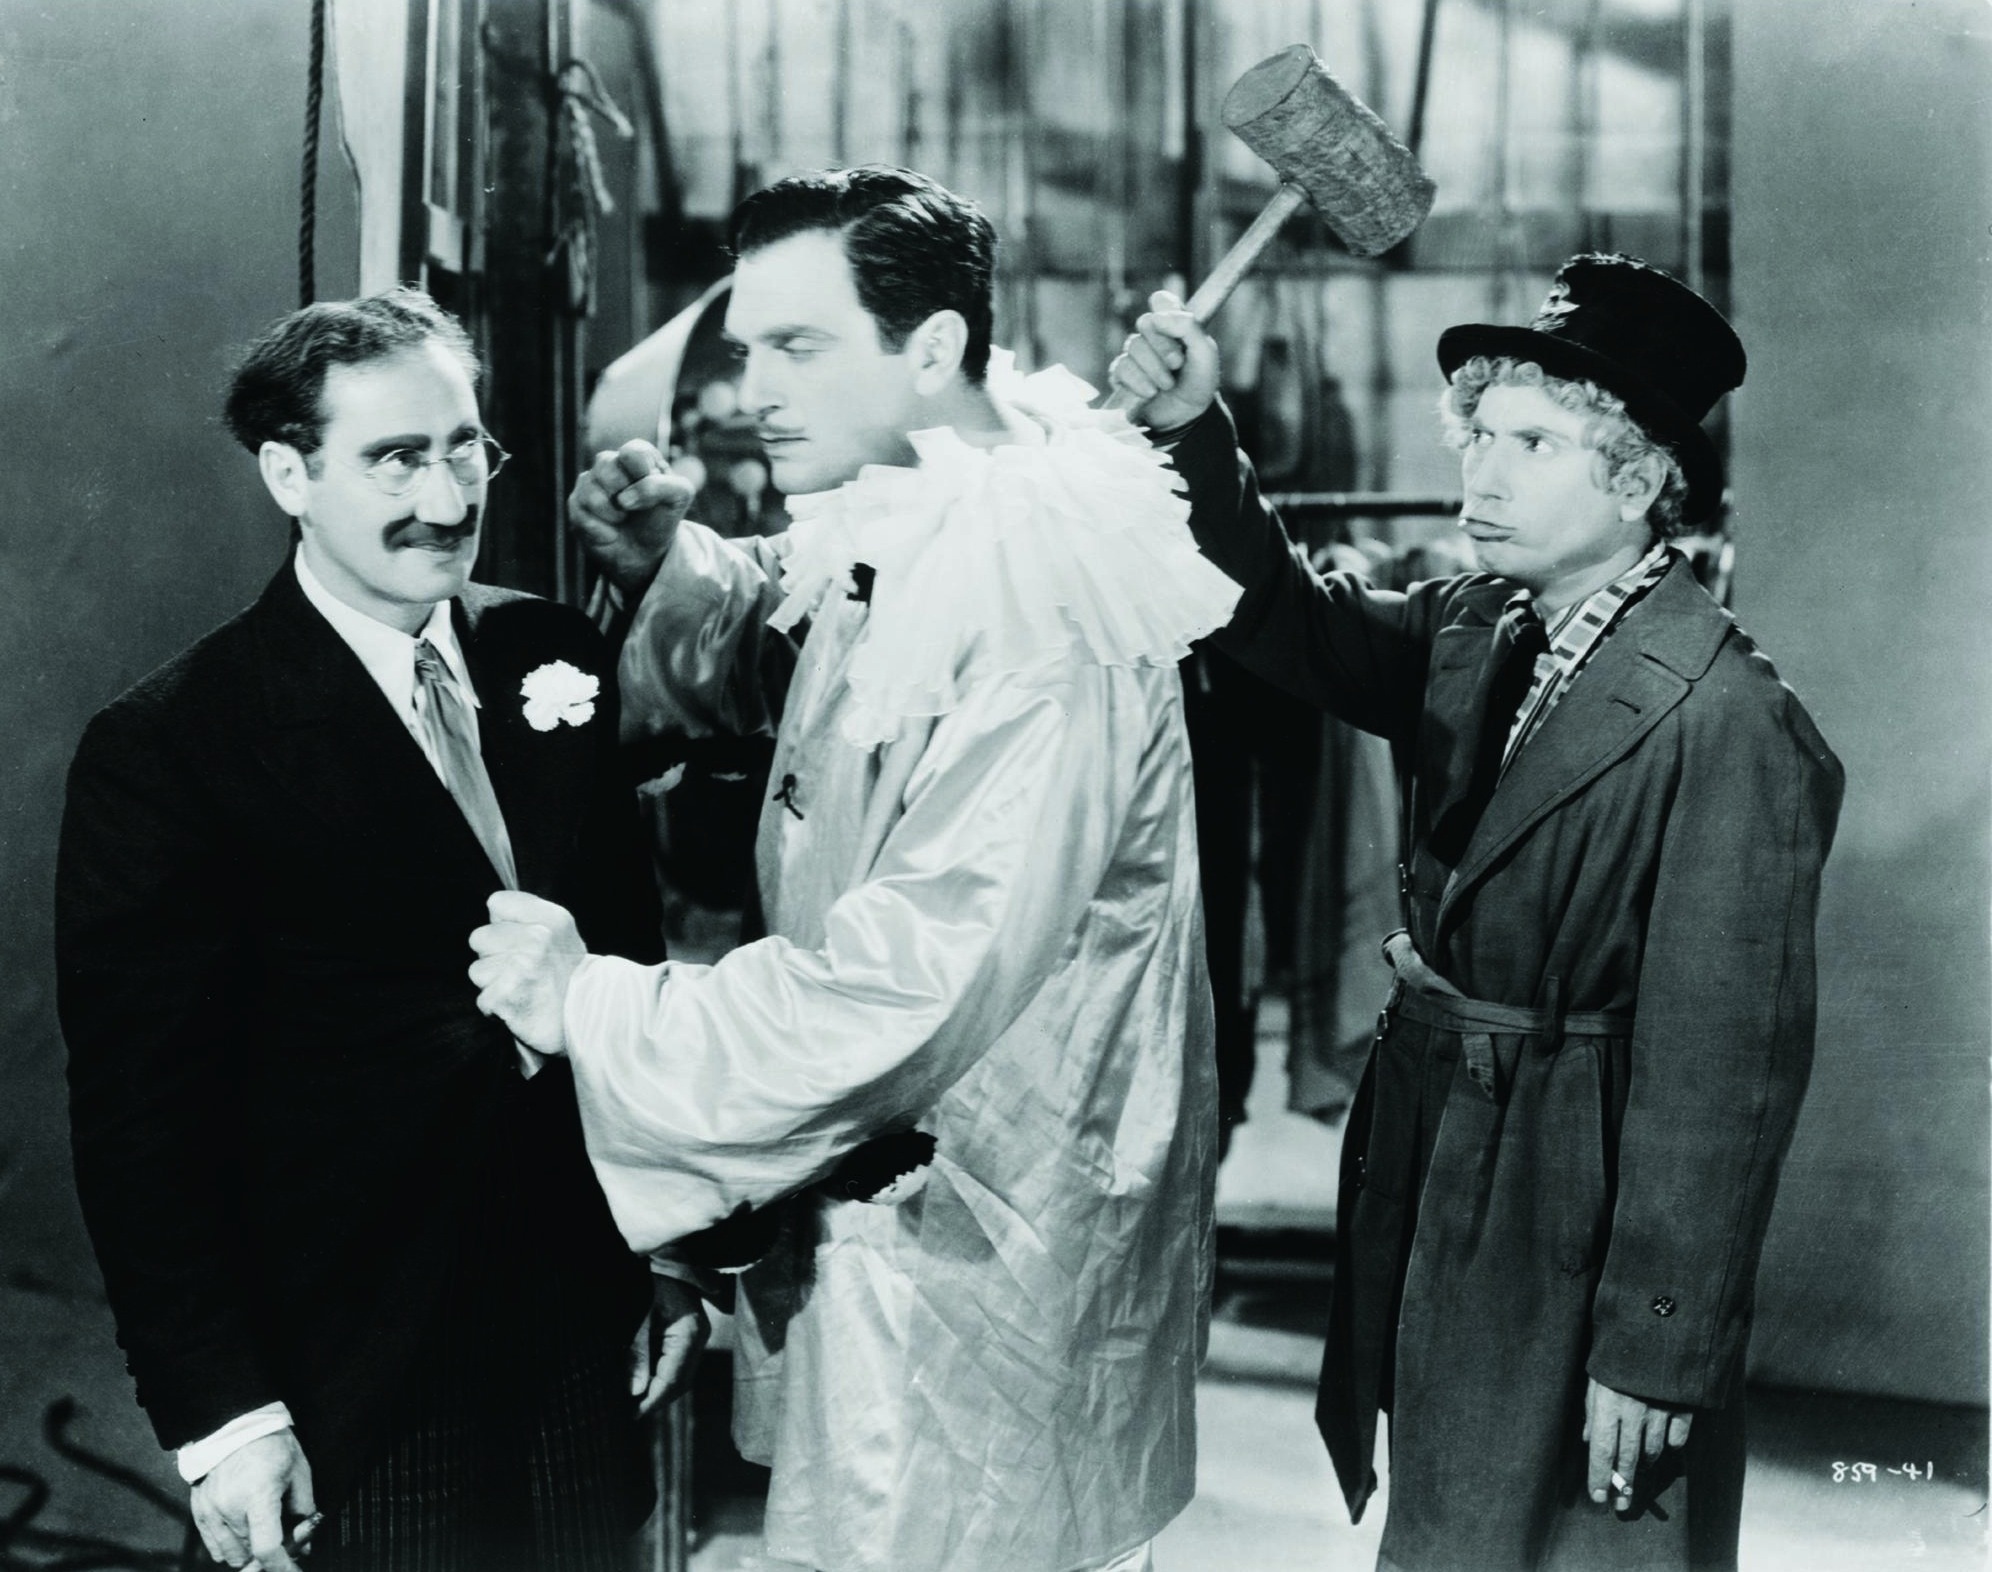 Still of Groucho Marx, Walter Woolf King and Harpo Marx in A Night at the Opera (1935)